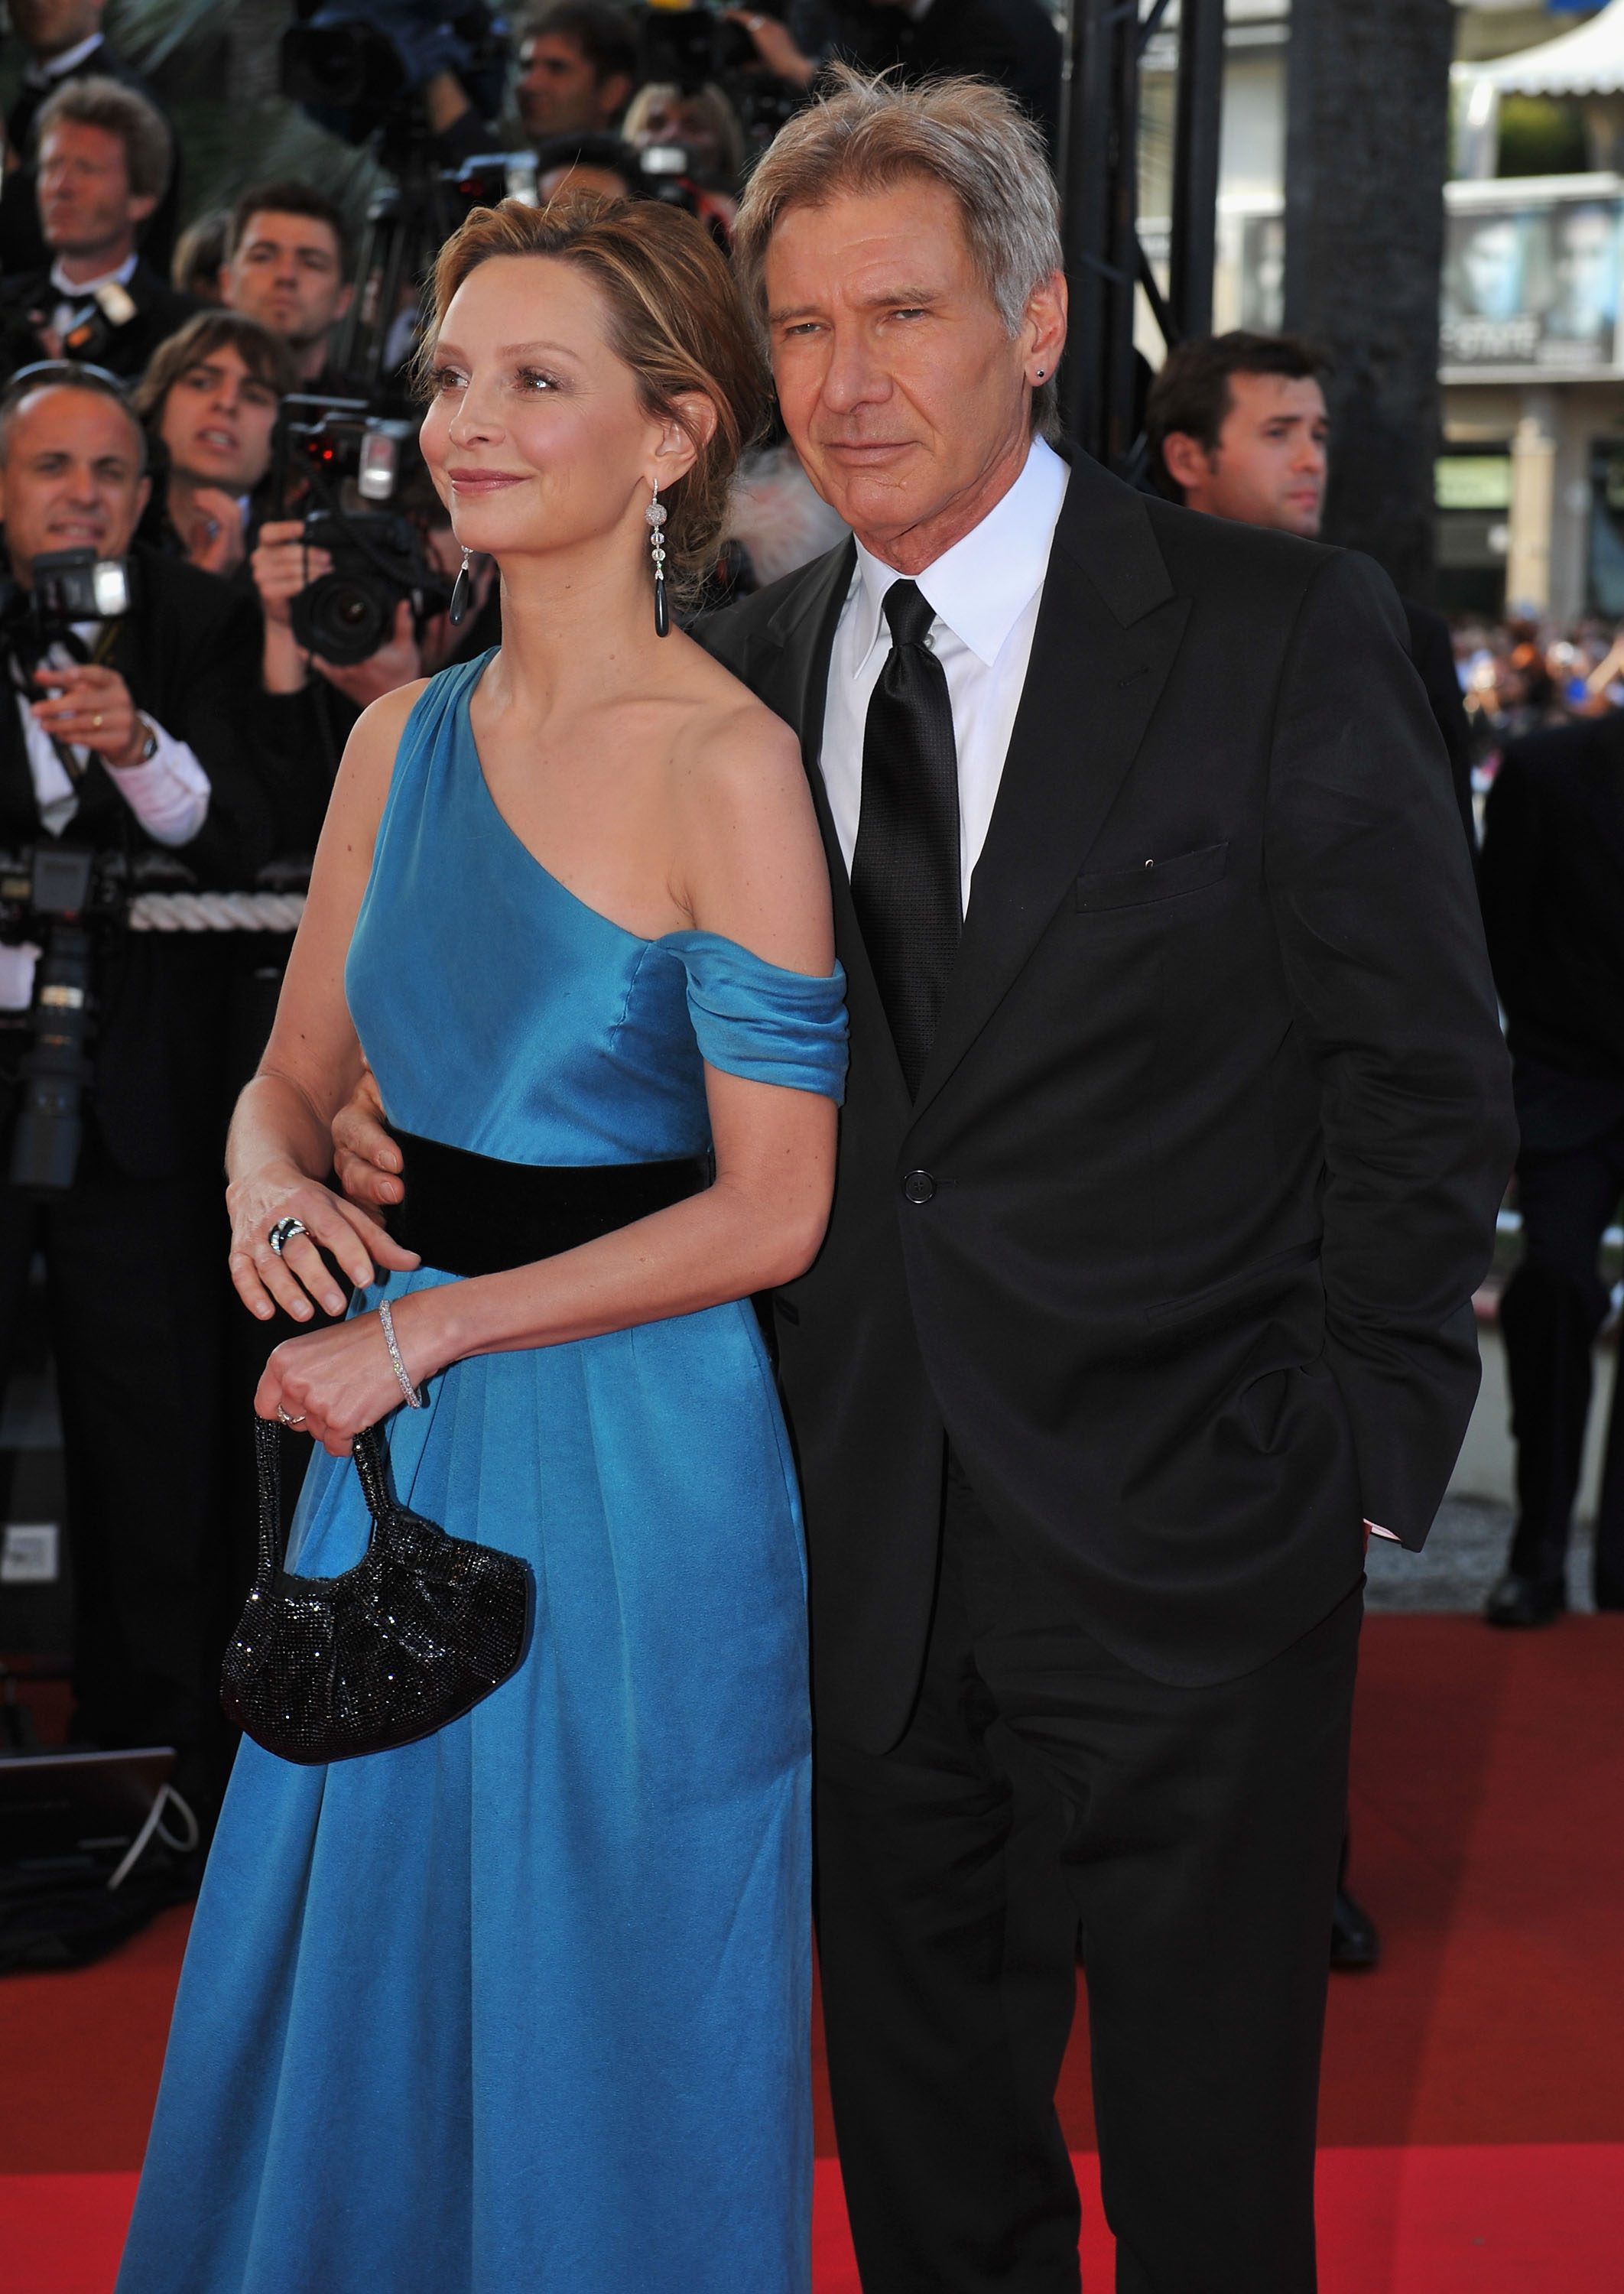 Calista Flockhart and Harrison Ford at the "Indiana Jones and The Kingdom of The Crystal Skull" premiere in 2008 | Source: Getty Images